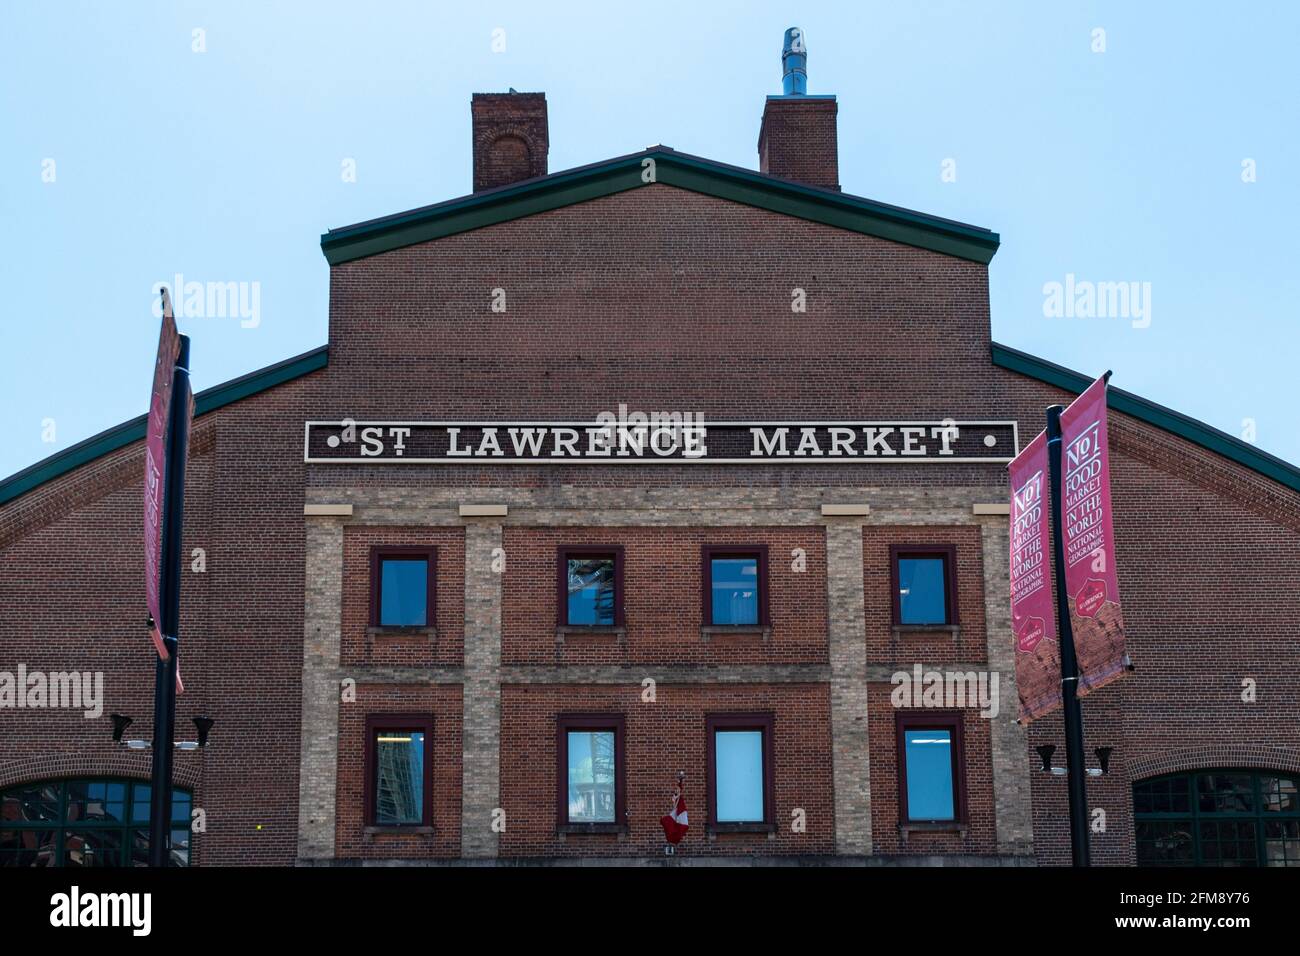 Saint Lawrence Market in Toronto, Canada. The famous place is considered one of the best food markets in the world. The image shows the exterior archi Stock Photo